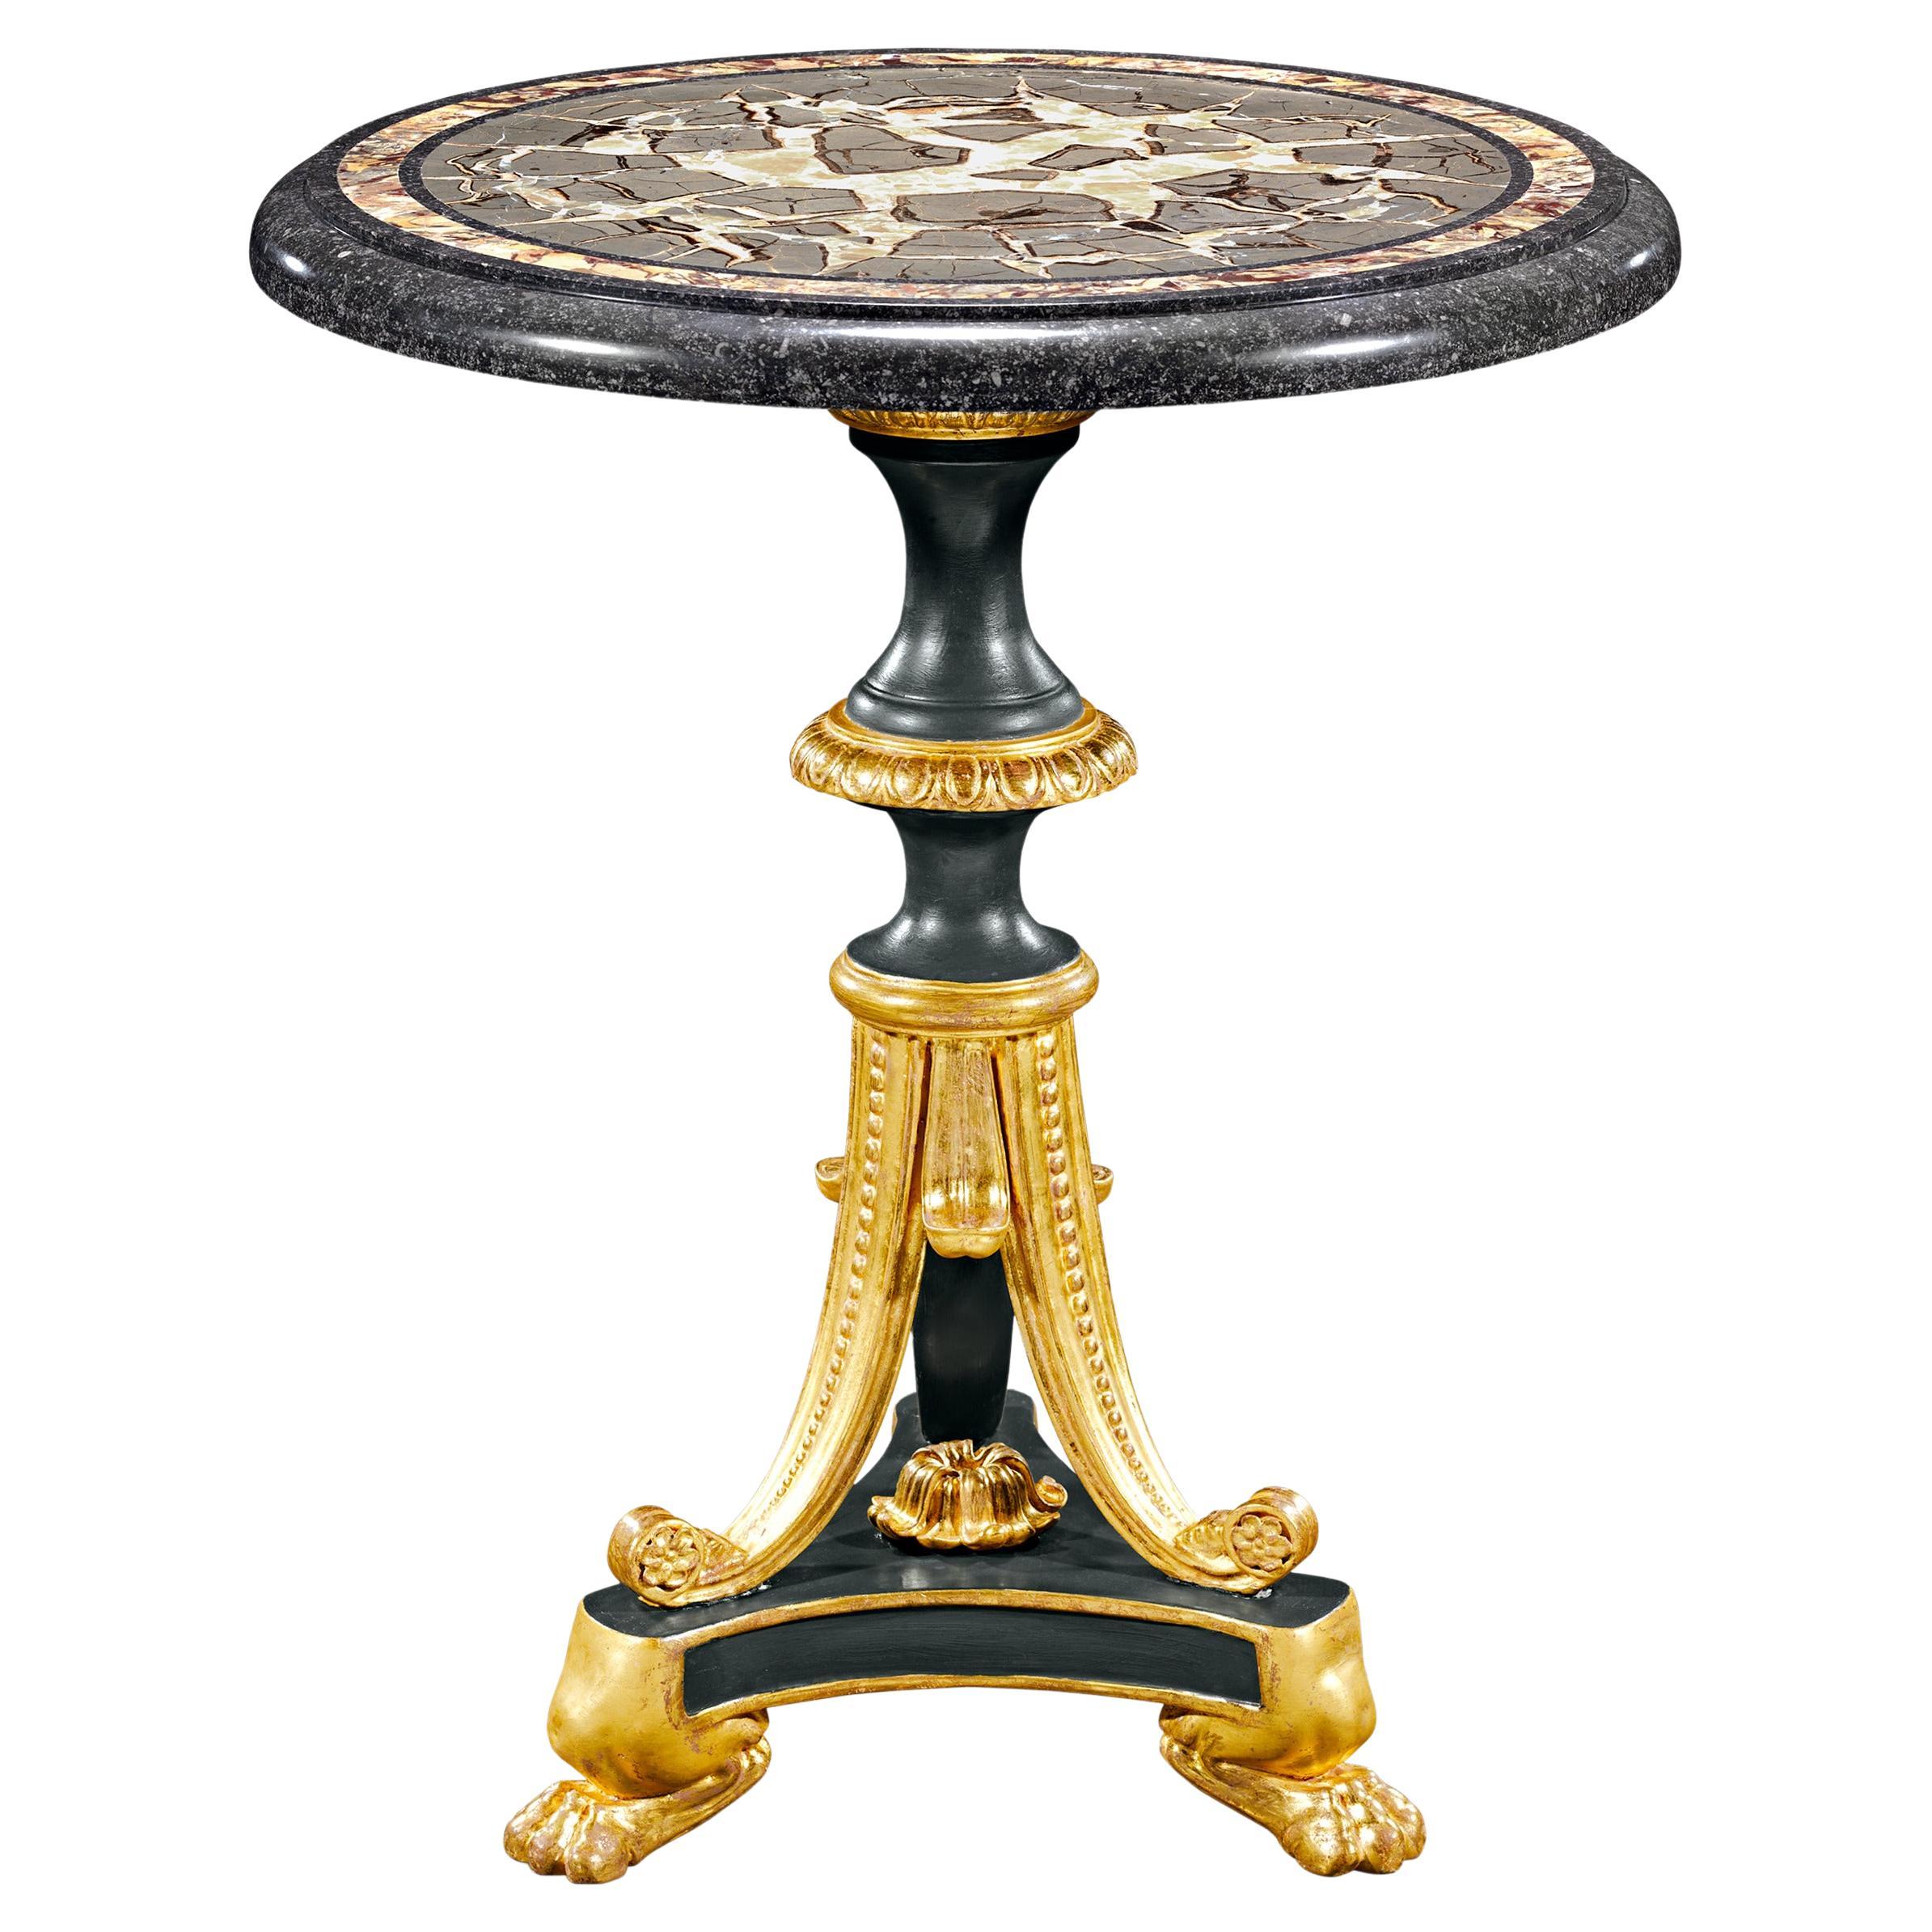 Turtle Stone and Royal Sarracolin Marble Parcel Gilt Table